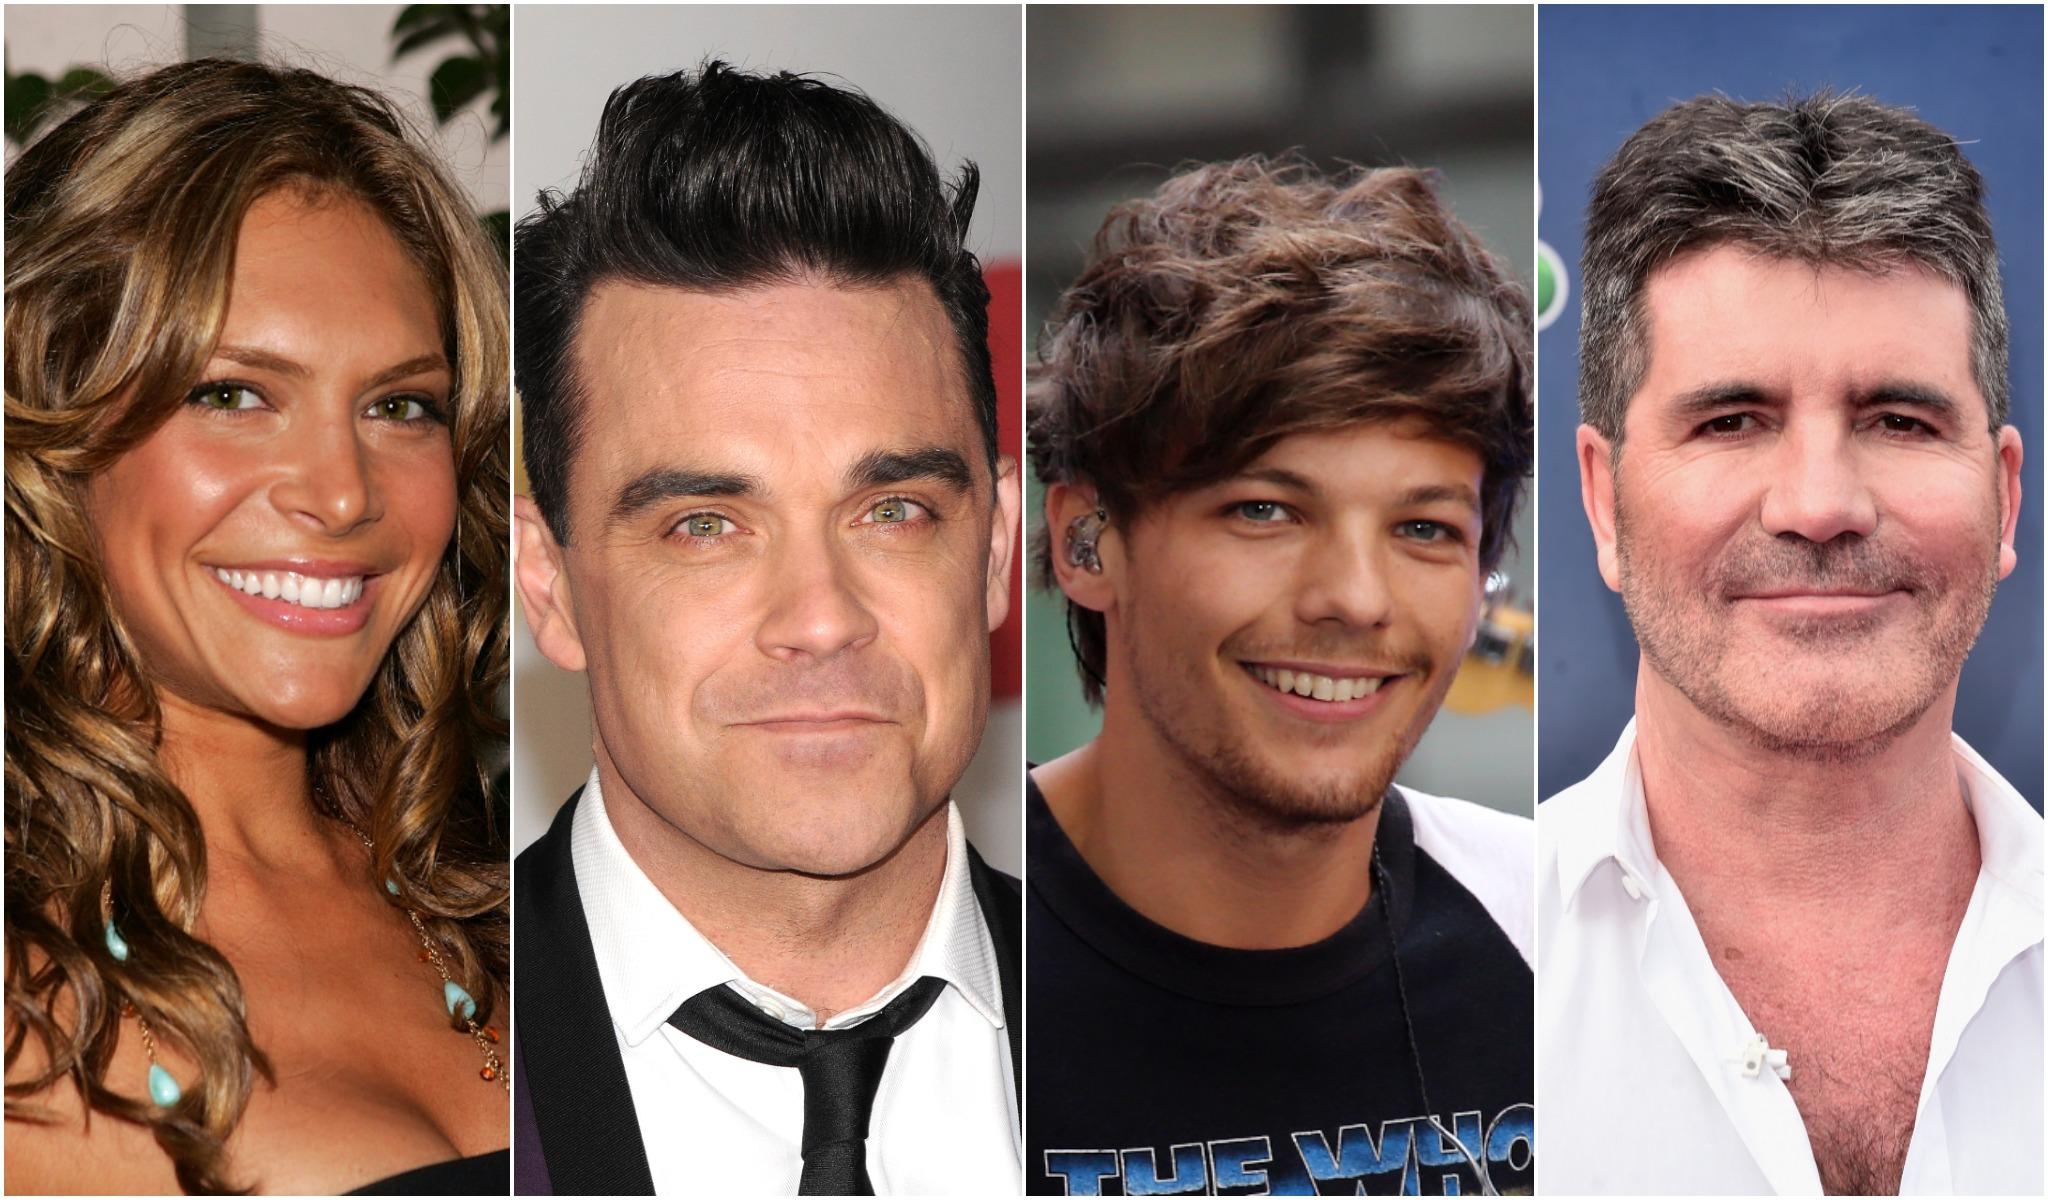 The new X Factor judges, Ayda Field, Robbie Williams, Louis Tomlinson, and Simon Cowell